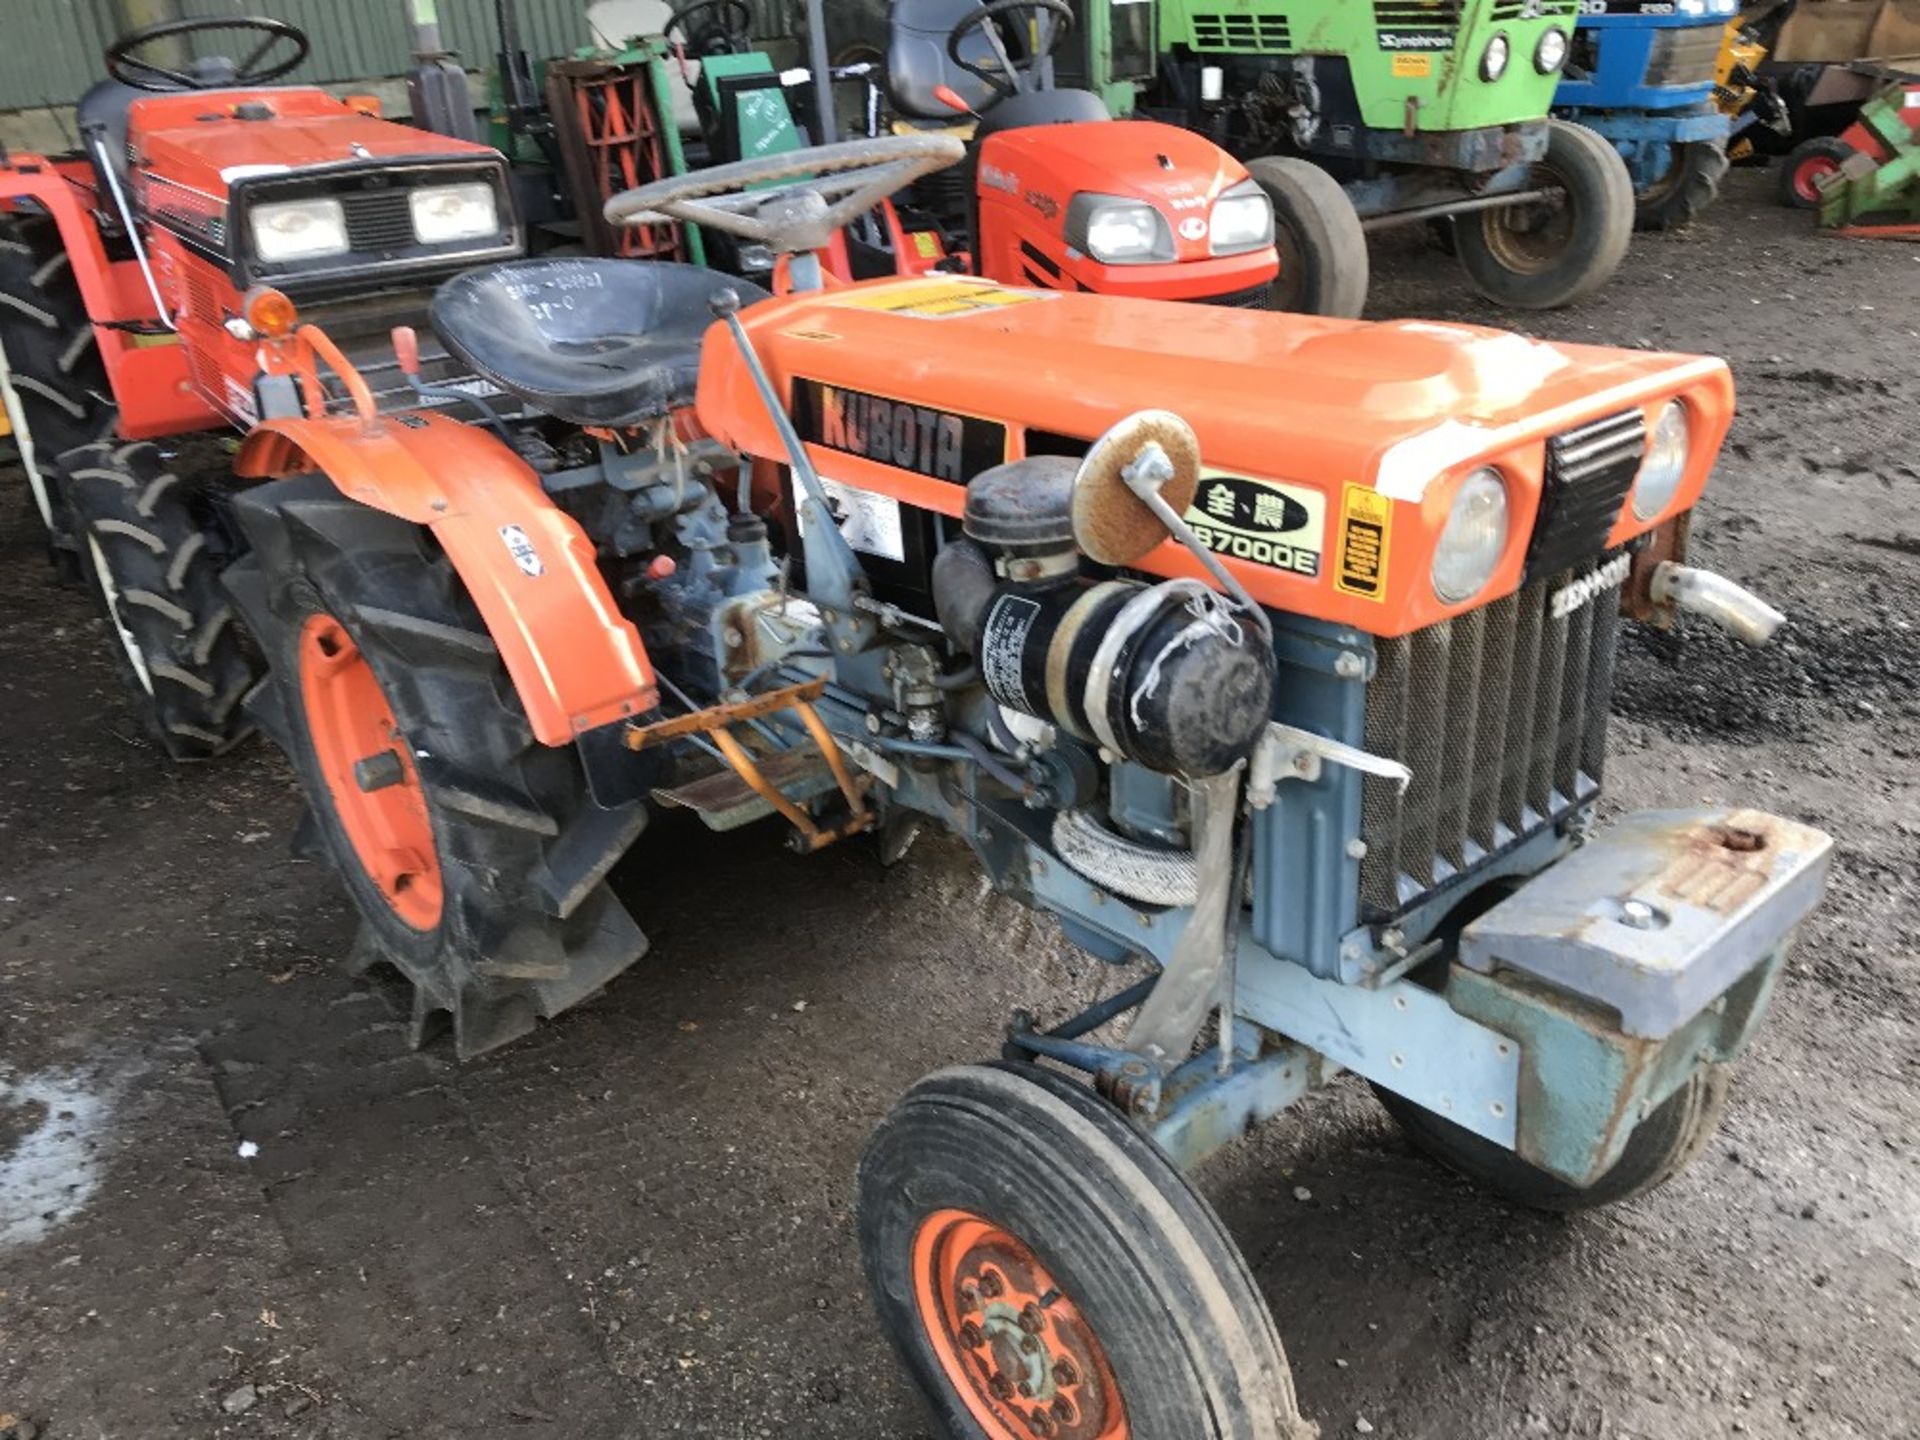 Kubota ZB7000E 2wd compact tractor c/w rear linkage WHEN TESTED WAS SEEN TO RUN, DRIVE, STEER AND